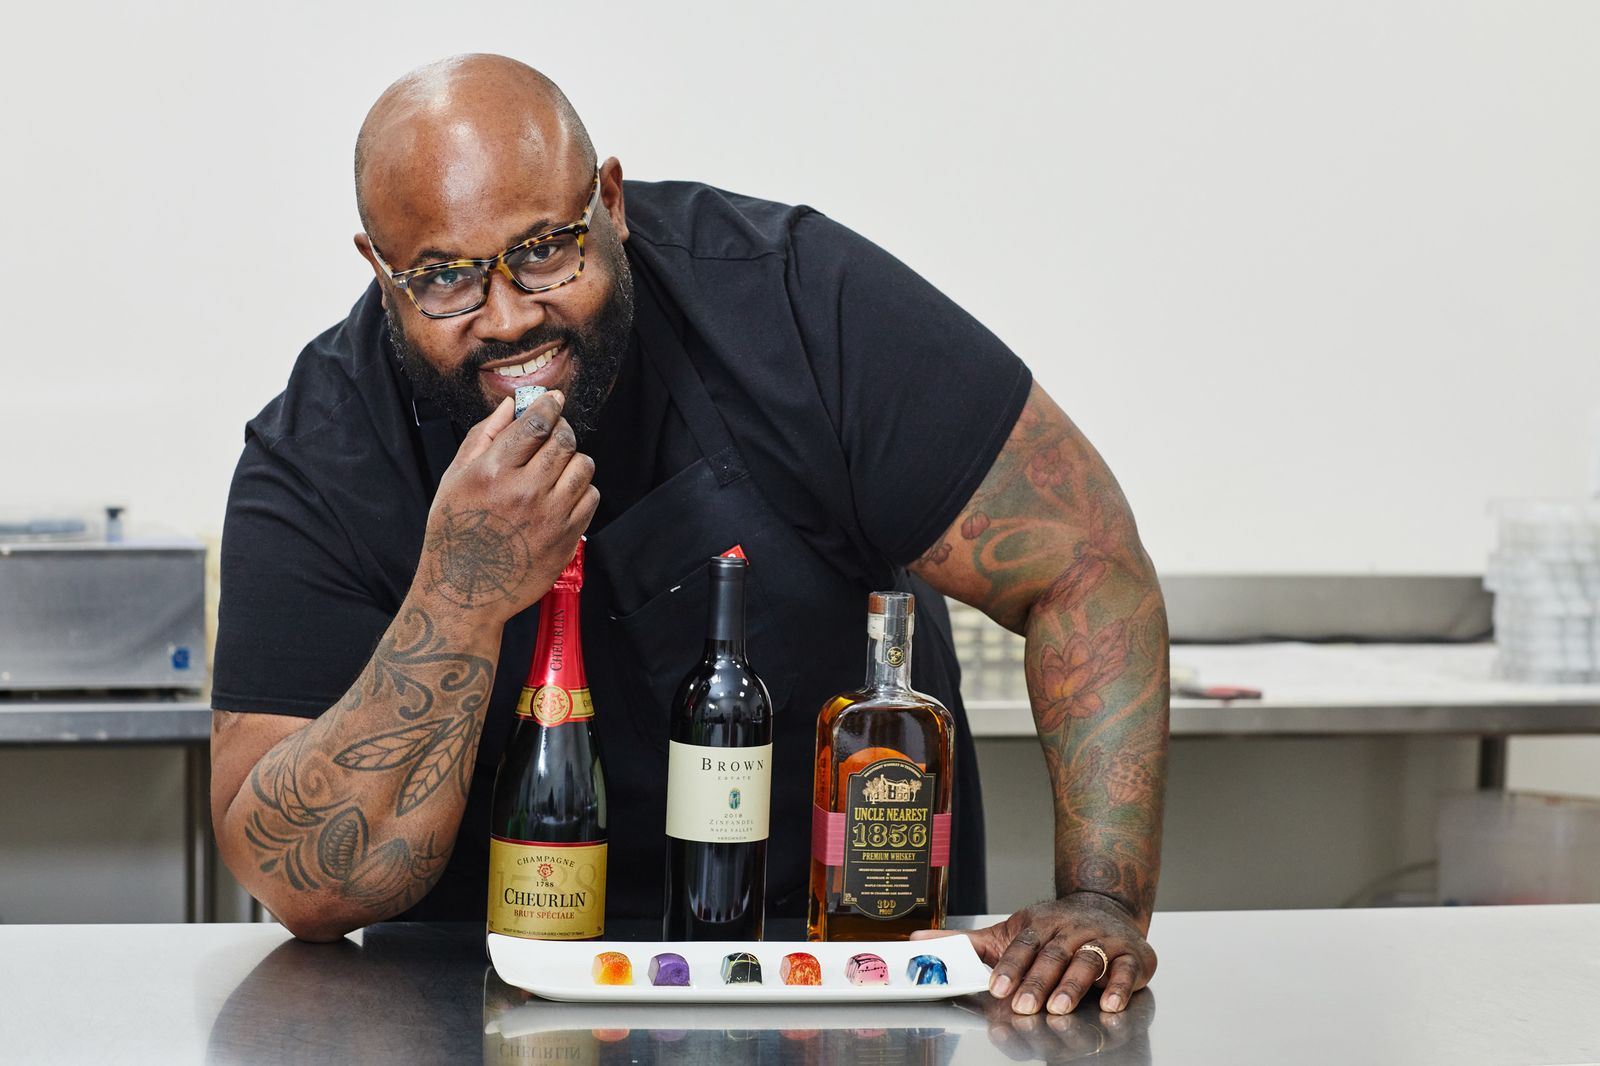 Black-Owned Chocolate Brand Wins Fans With Margarita, Truffle Flavors